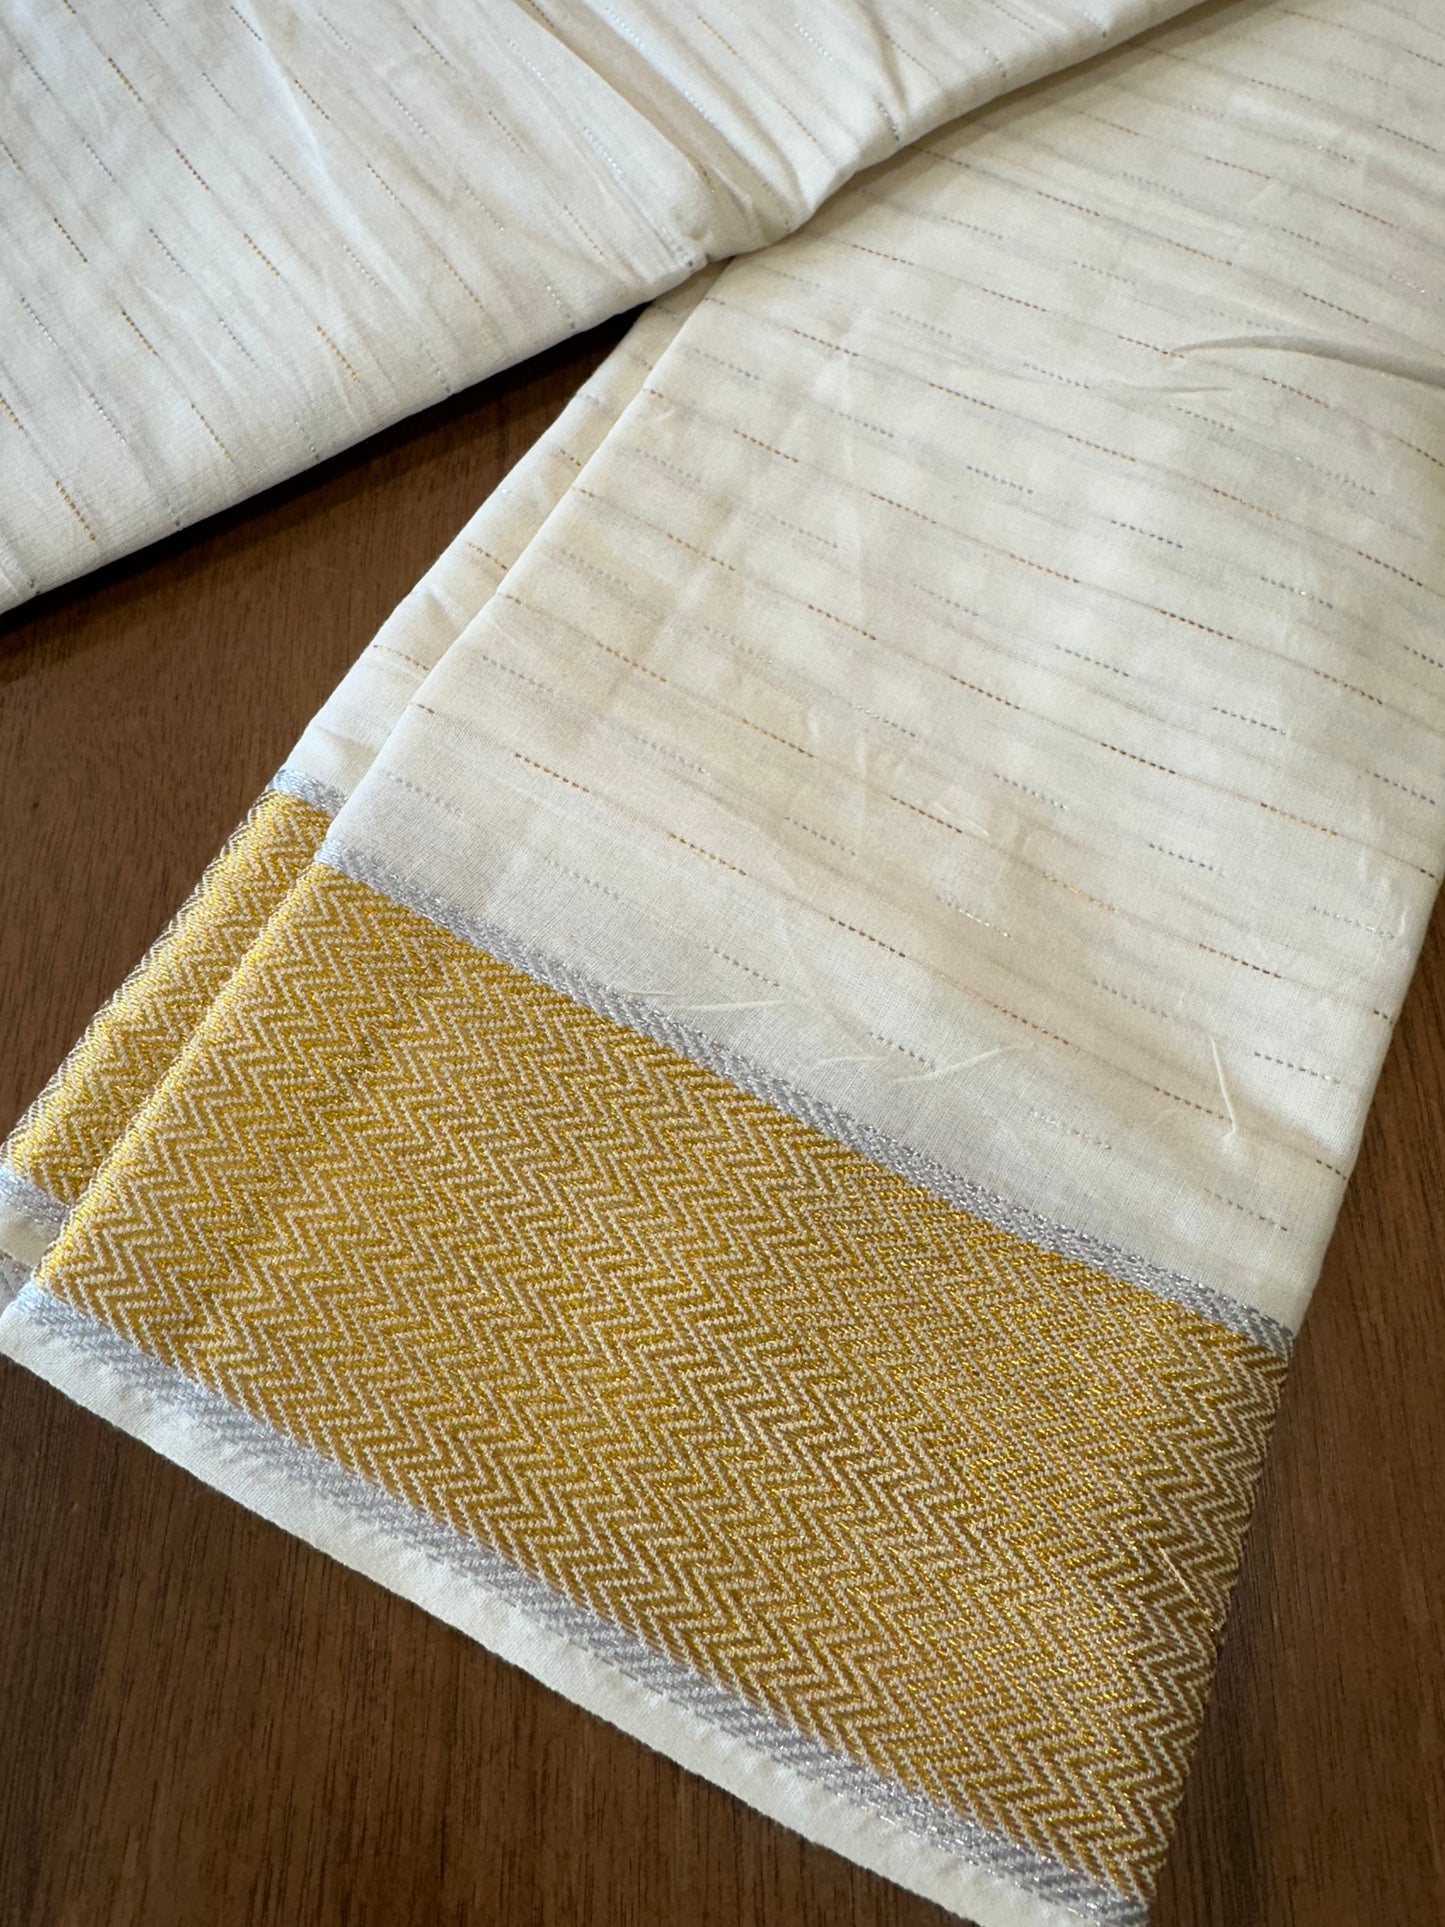 Kerala Striped Cotton Skirt Material with Gold And Silver Kasavu Woven Border (4 meters)